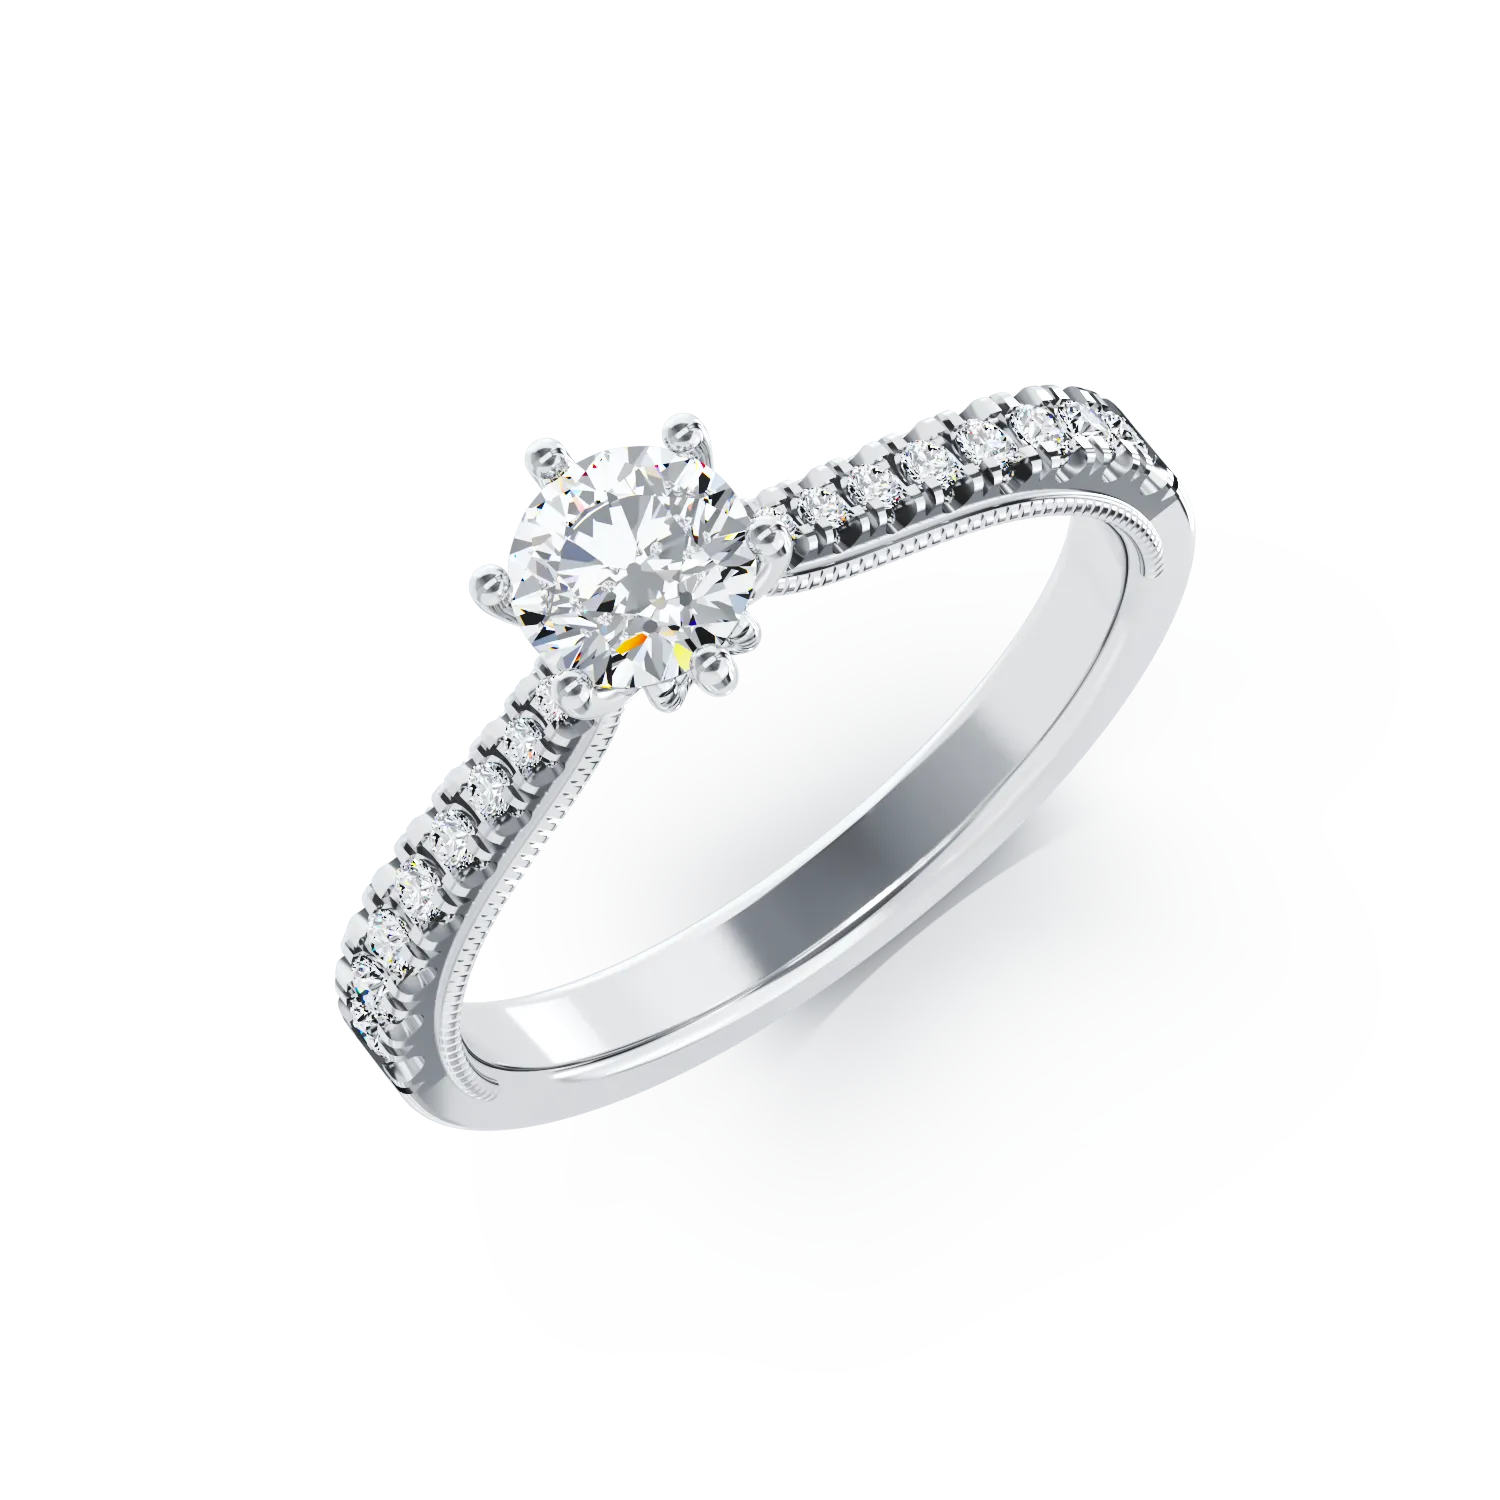 18K white gold engagement ring with 0.16ct diamond and 0.18ct diamonds